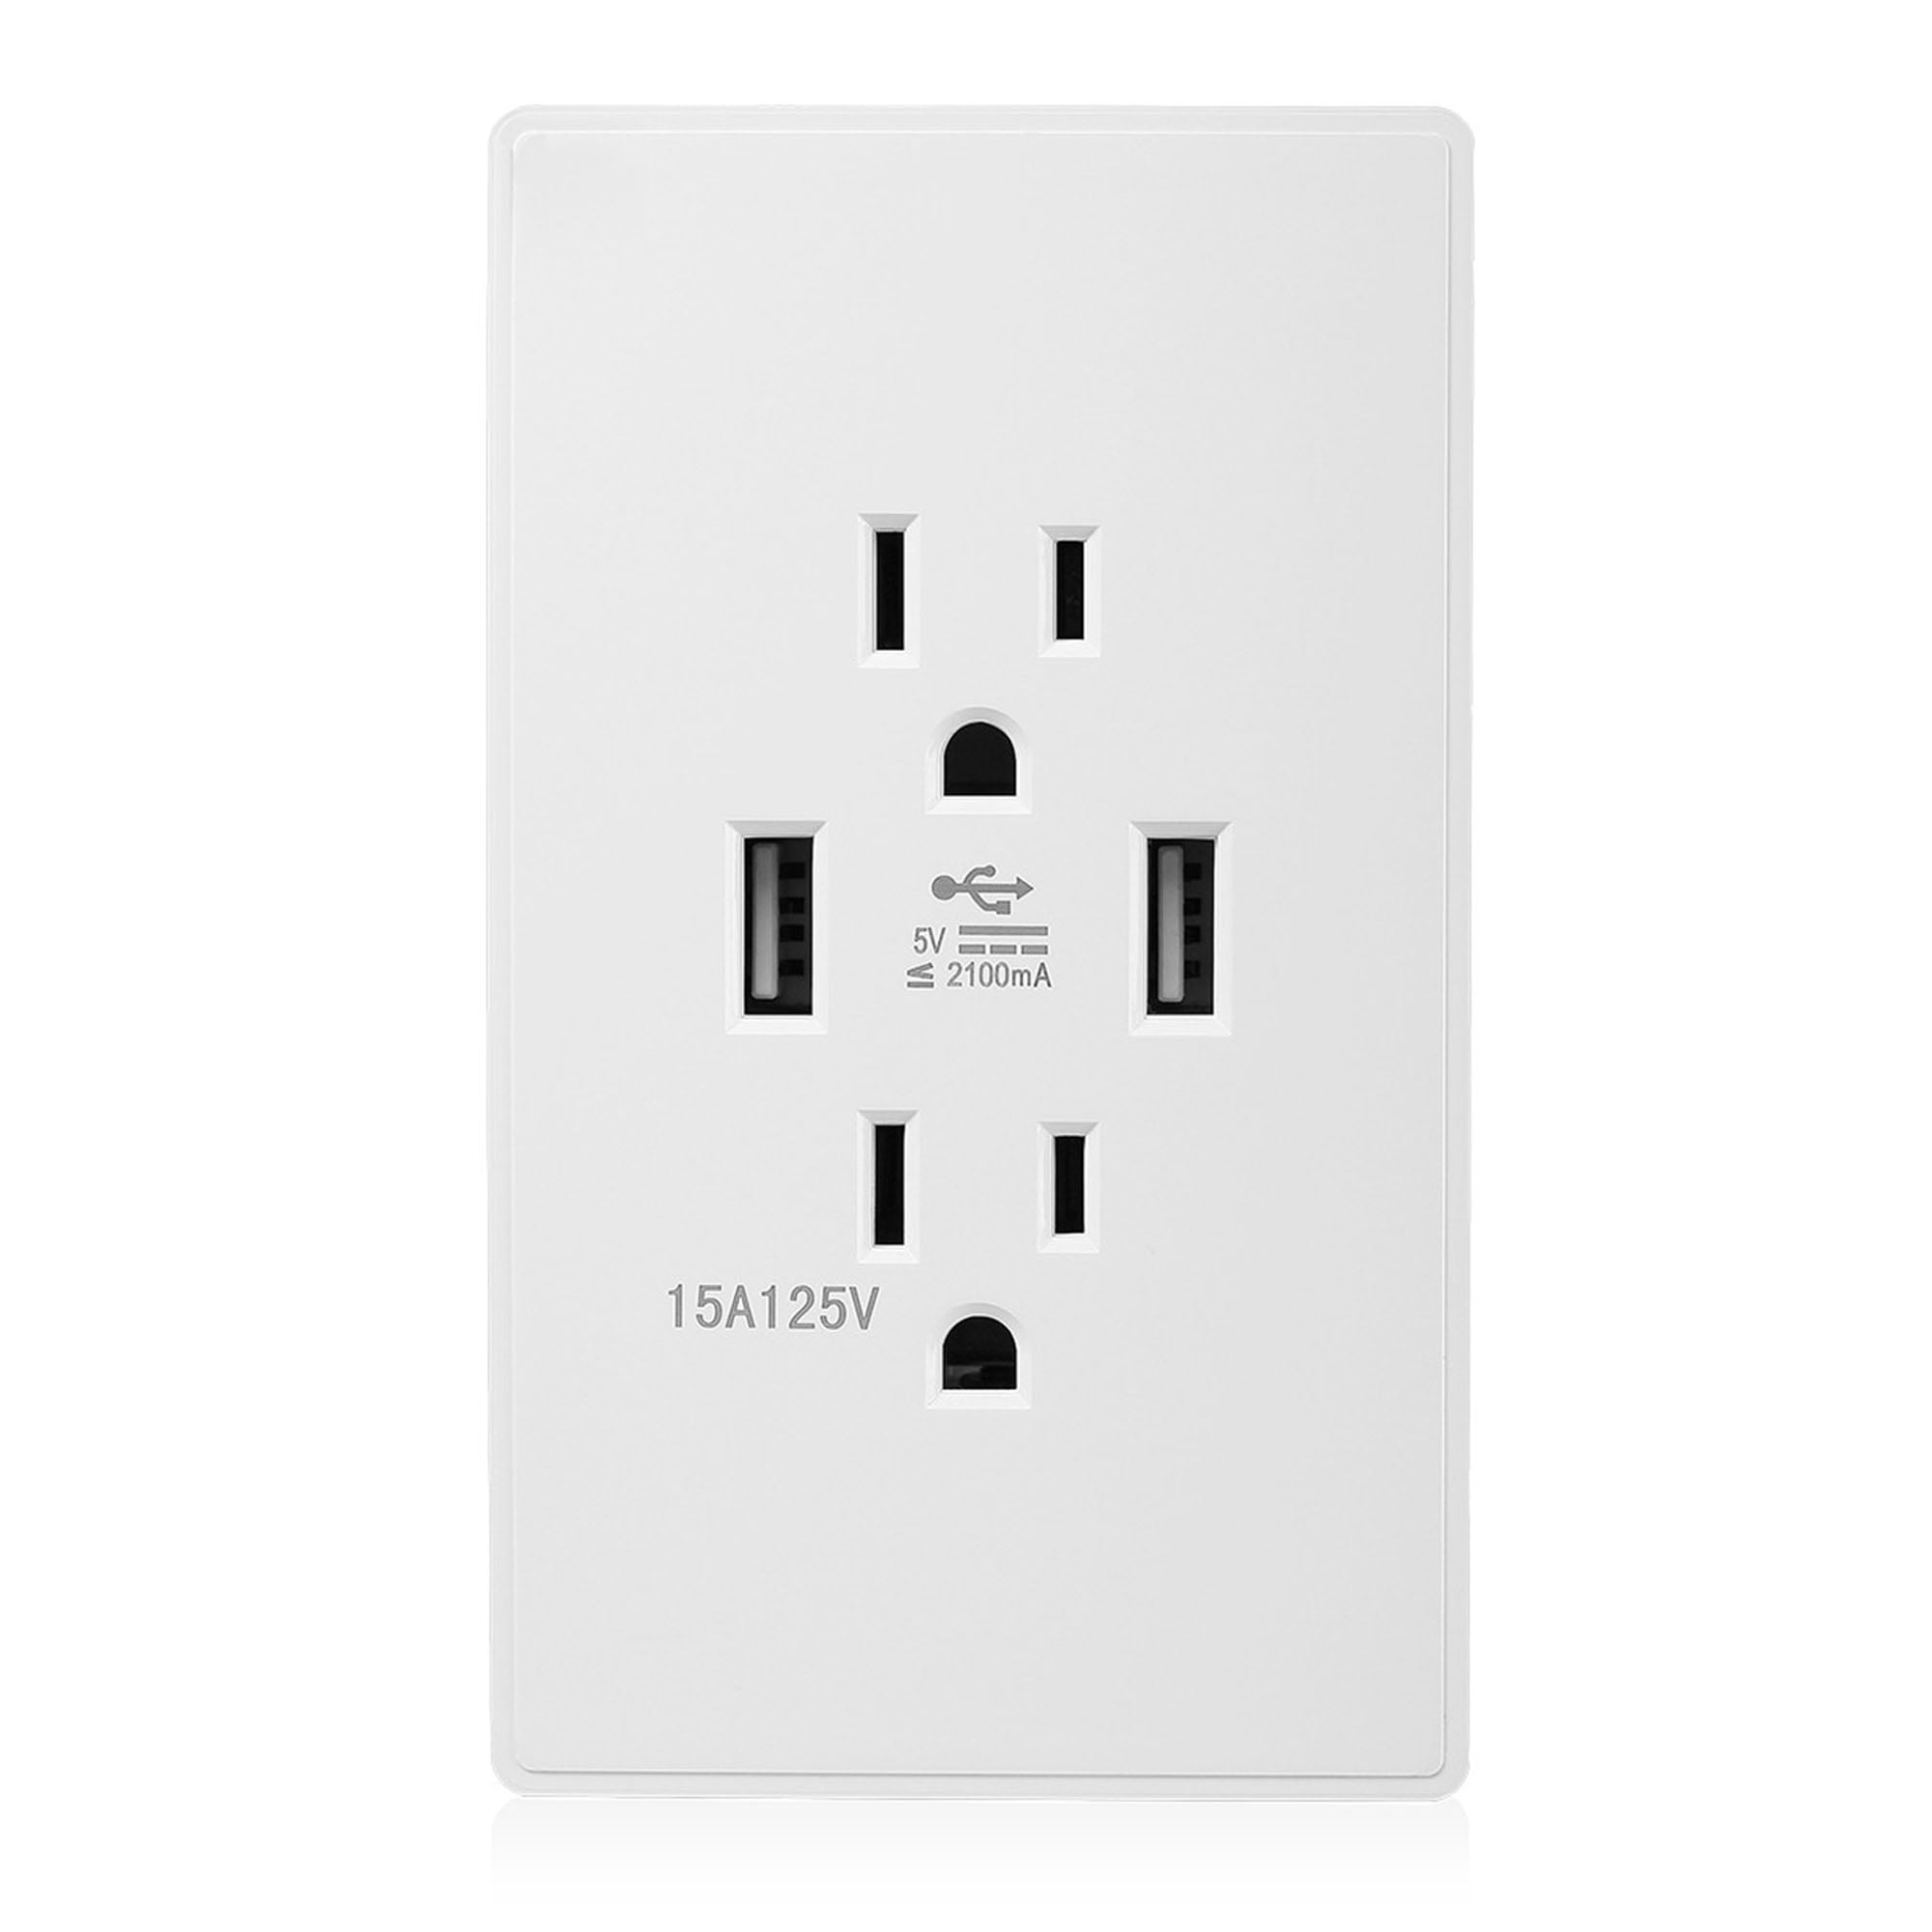 Details about   US Double Plug Power Wall Socket Plate USB Port SmratPhones Charge Outlet AT 